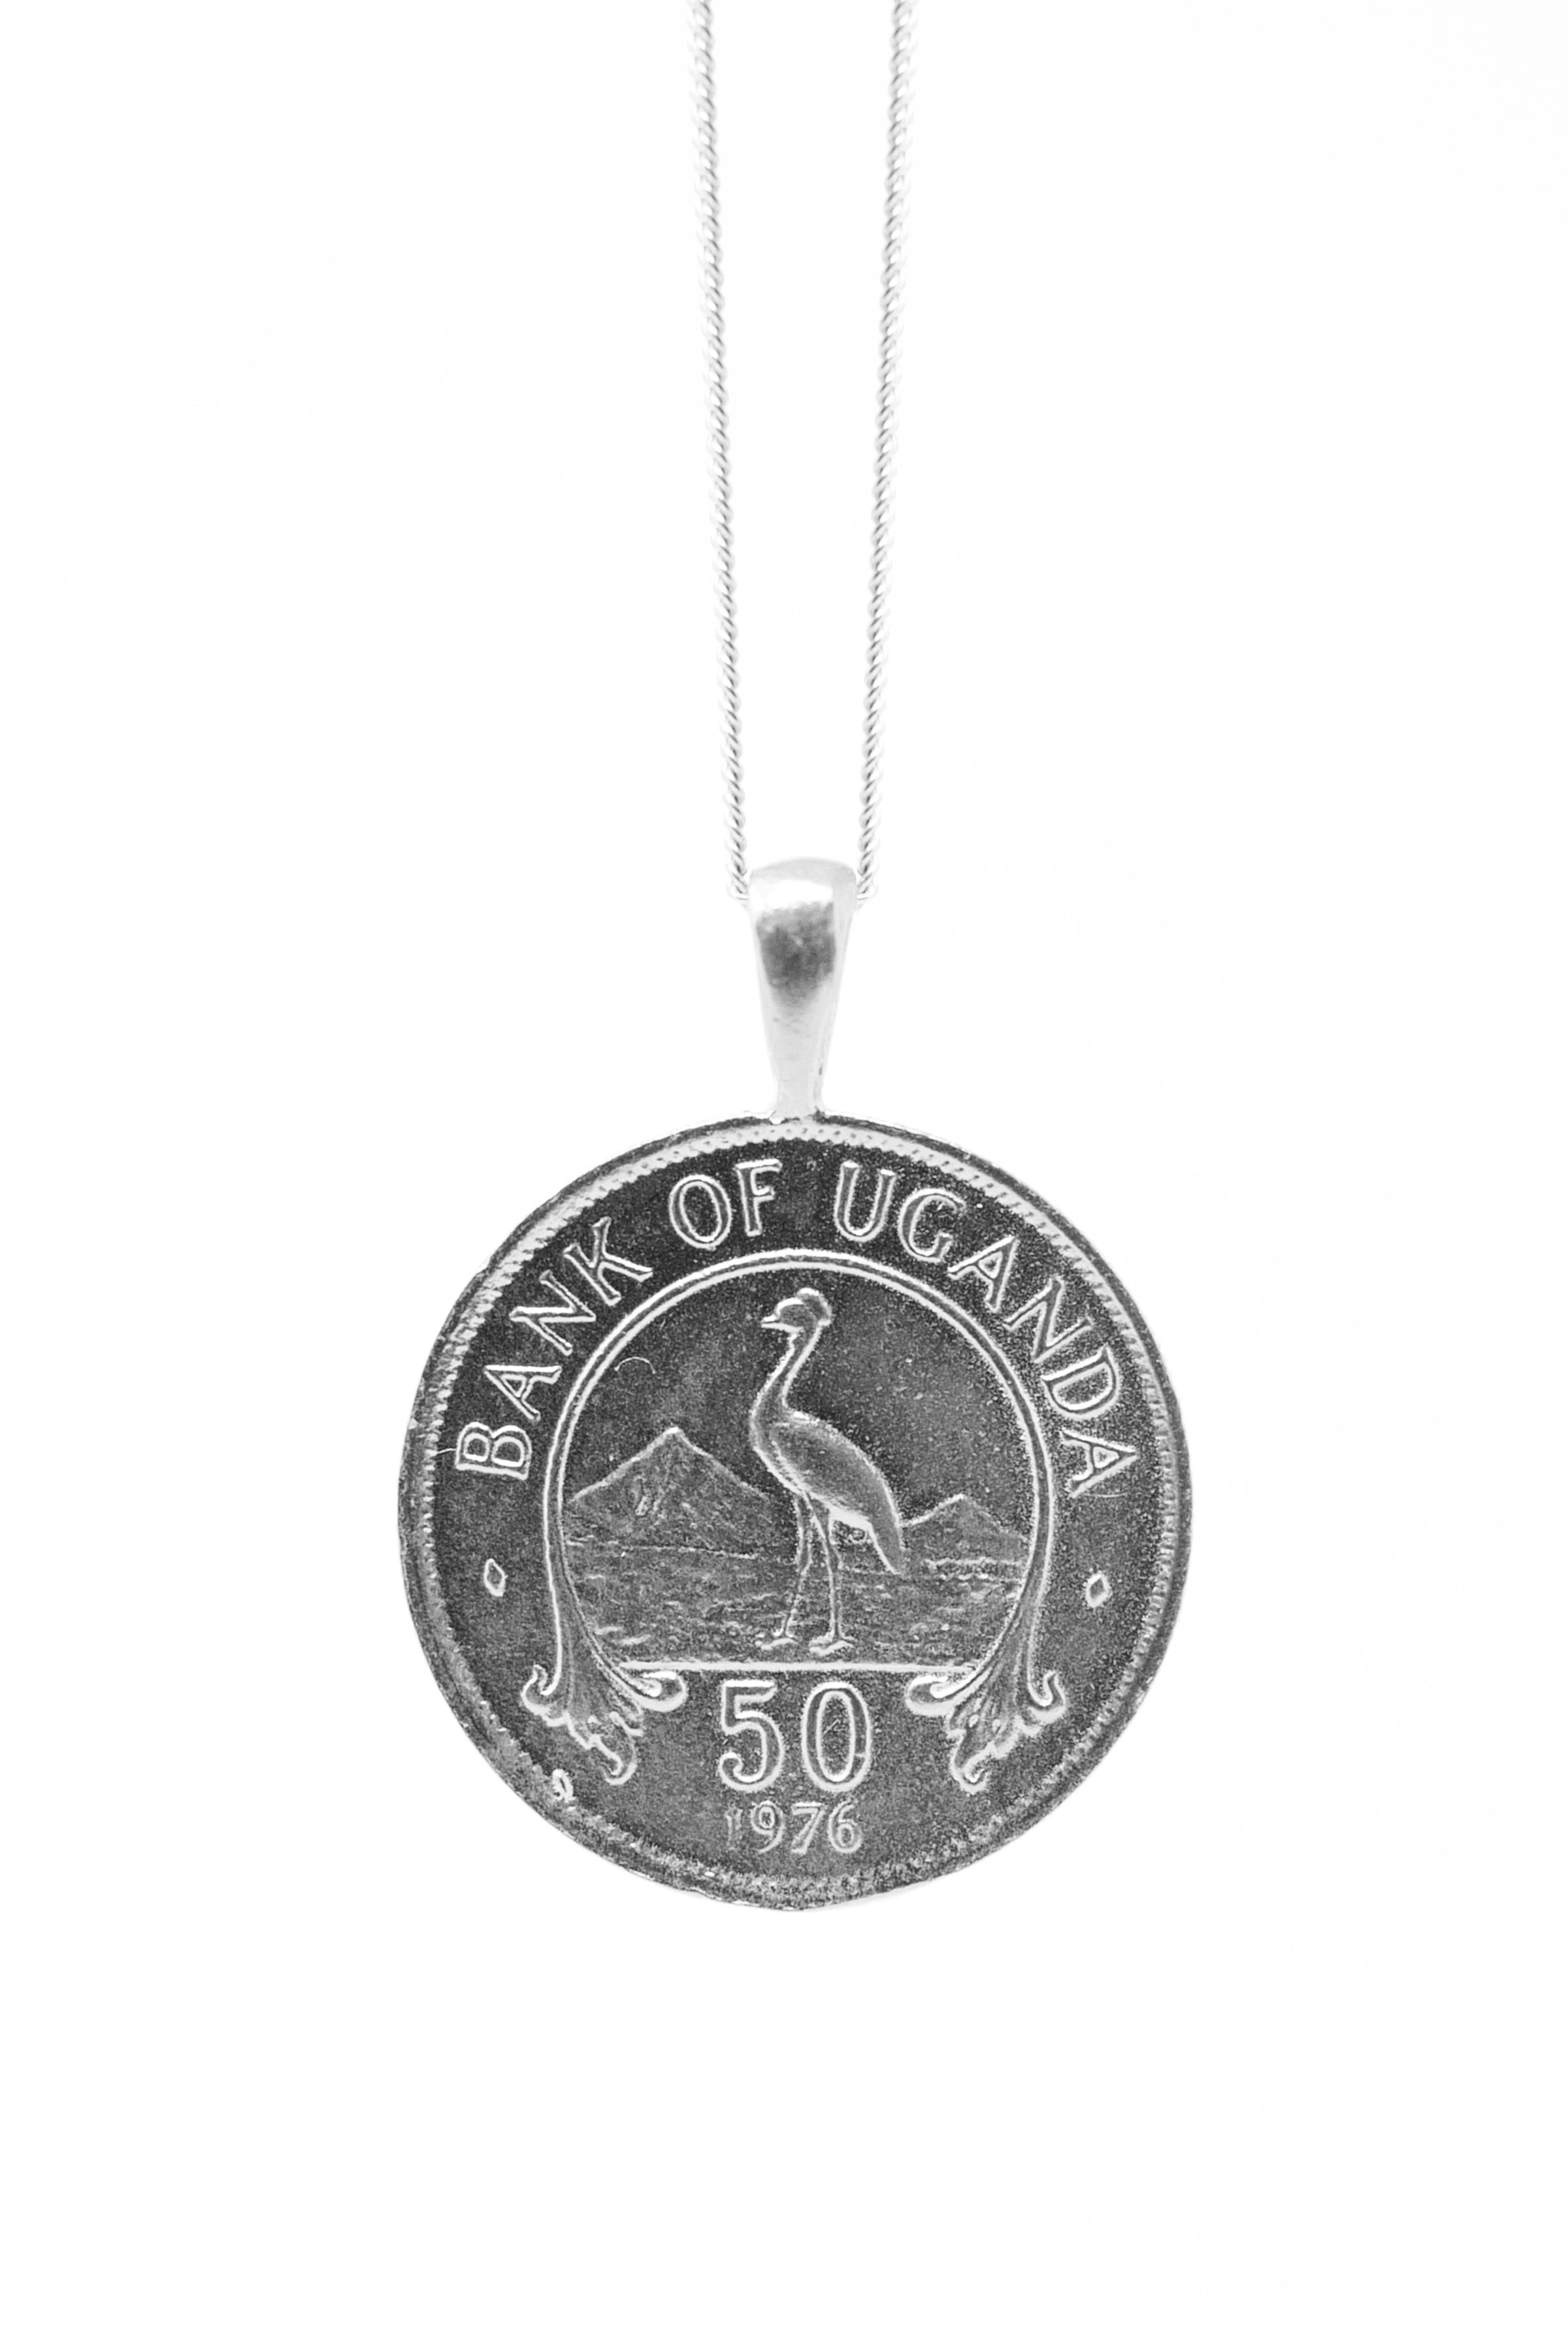 Amazon.com: 25 Cent/USA Quarter Coin Holder Bezel ~ for Charm, Necklace,  Pendant, Display : Clothing, Shoes & Jewelry